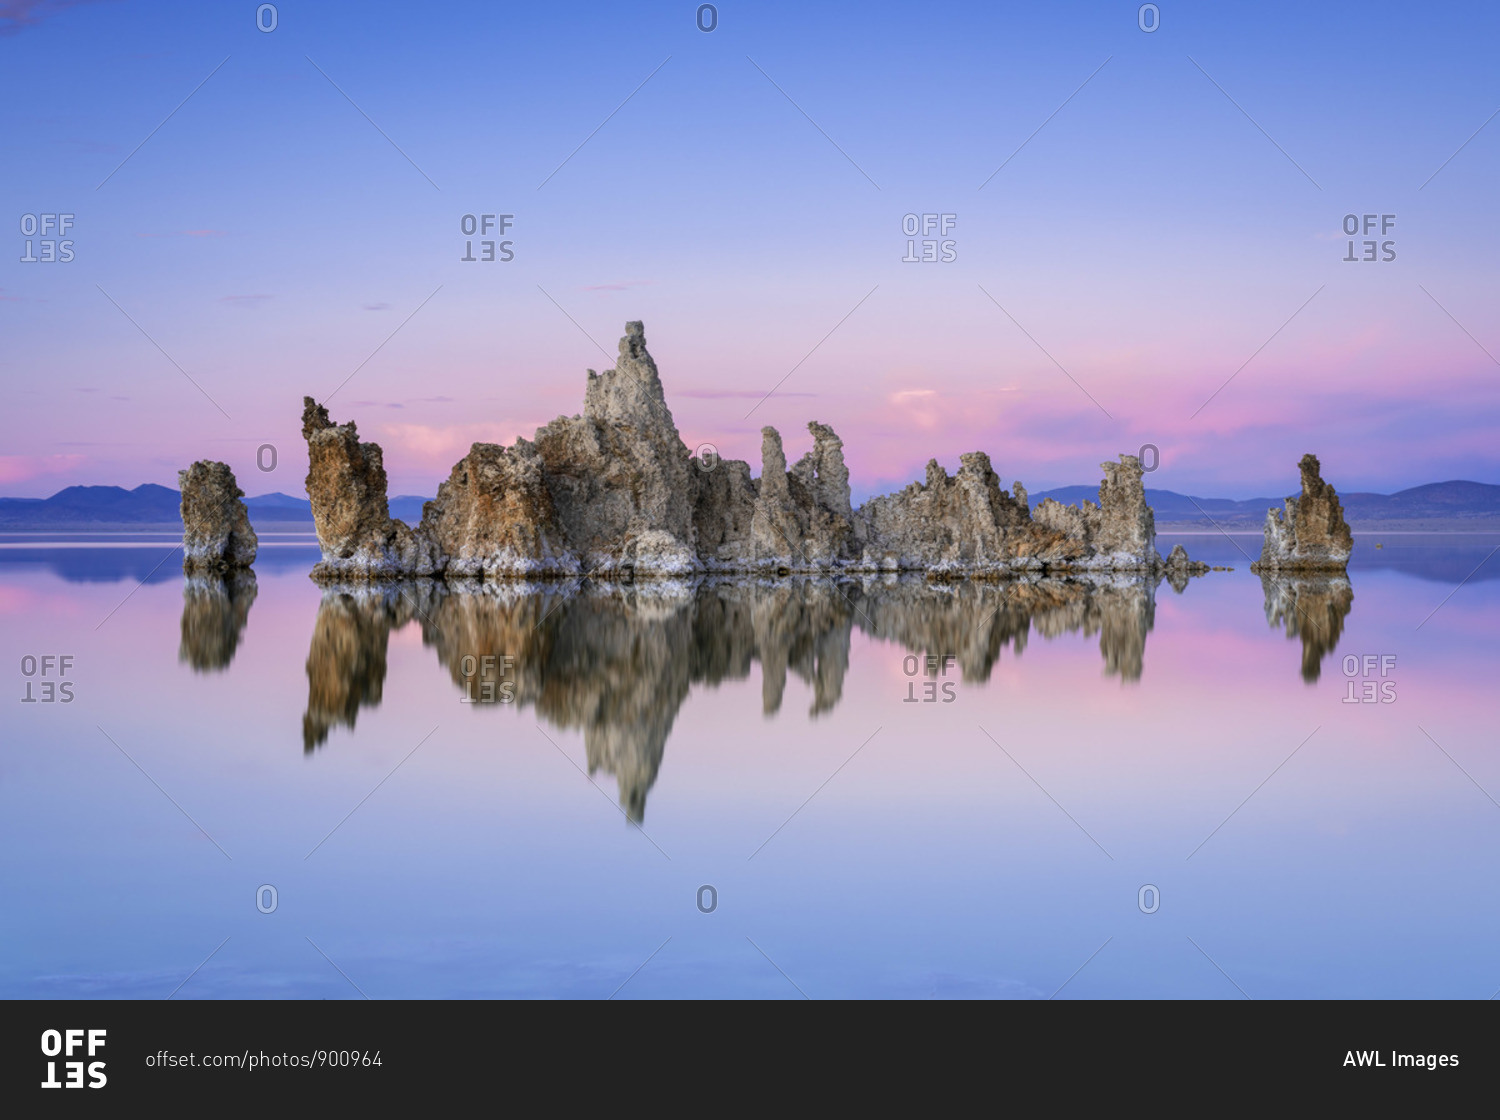 Reflection of rock formation in South Tufa on Mono Lake against blue sky at sunset, Mono County, Sierra Nevada, Eastern California, California, USA